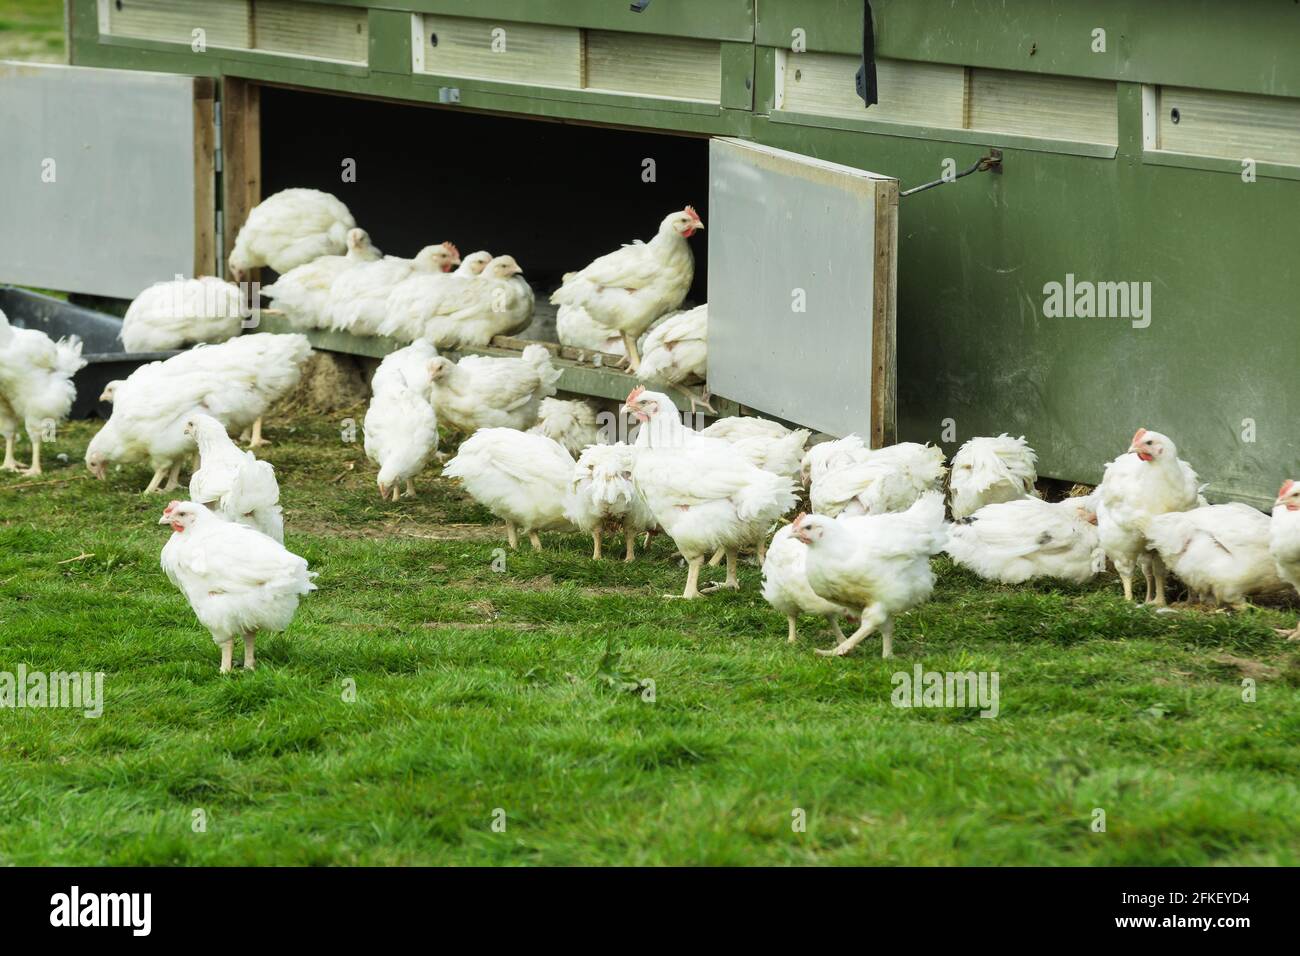 Organic free range chickens being allowed to live a more natural life outdoors and providing a good quality of life on an organic farm in the UK Stock Photo